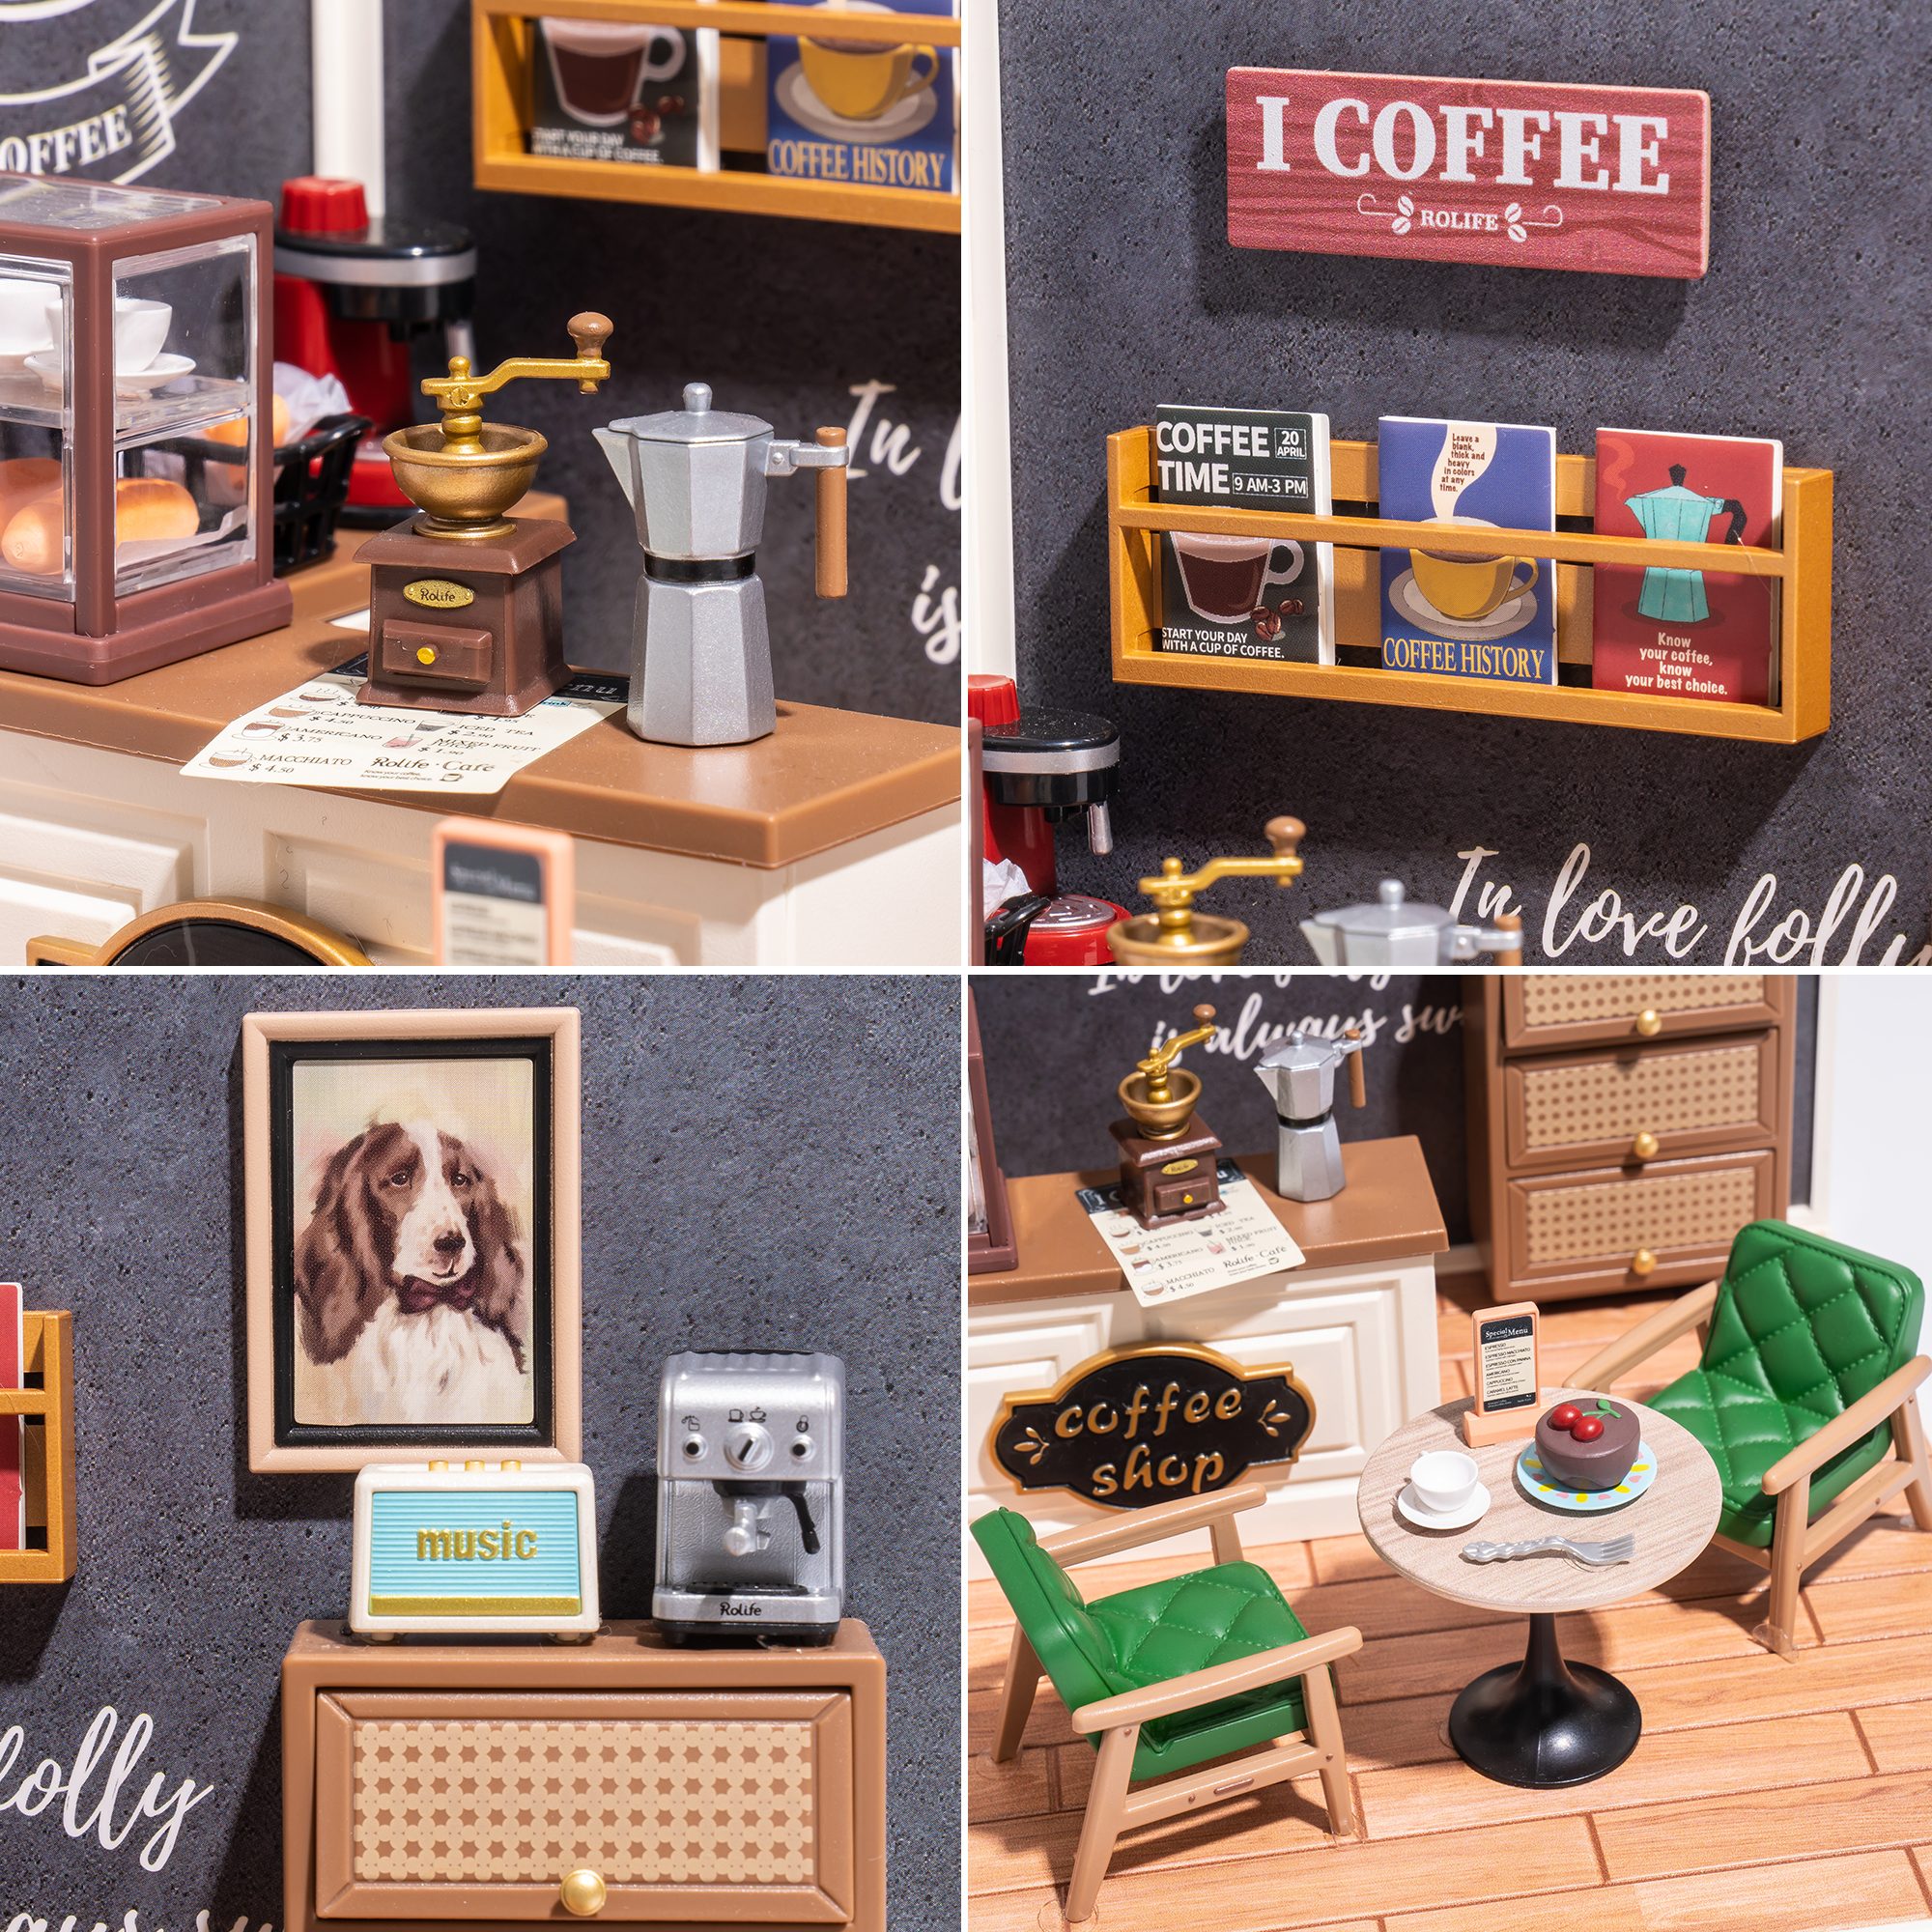 Rolife Daily Inspiration Cafe - Magnote Gifts